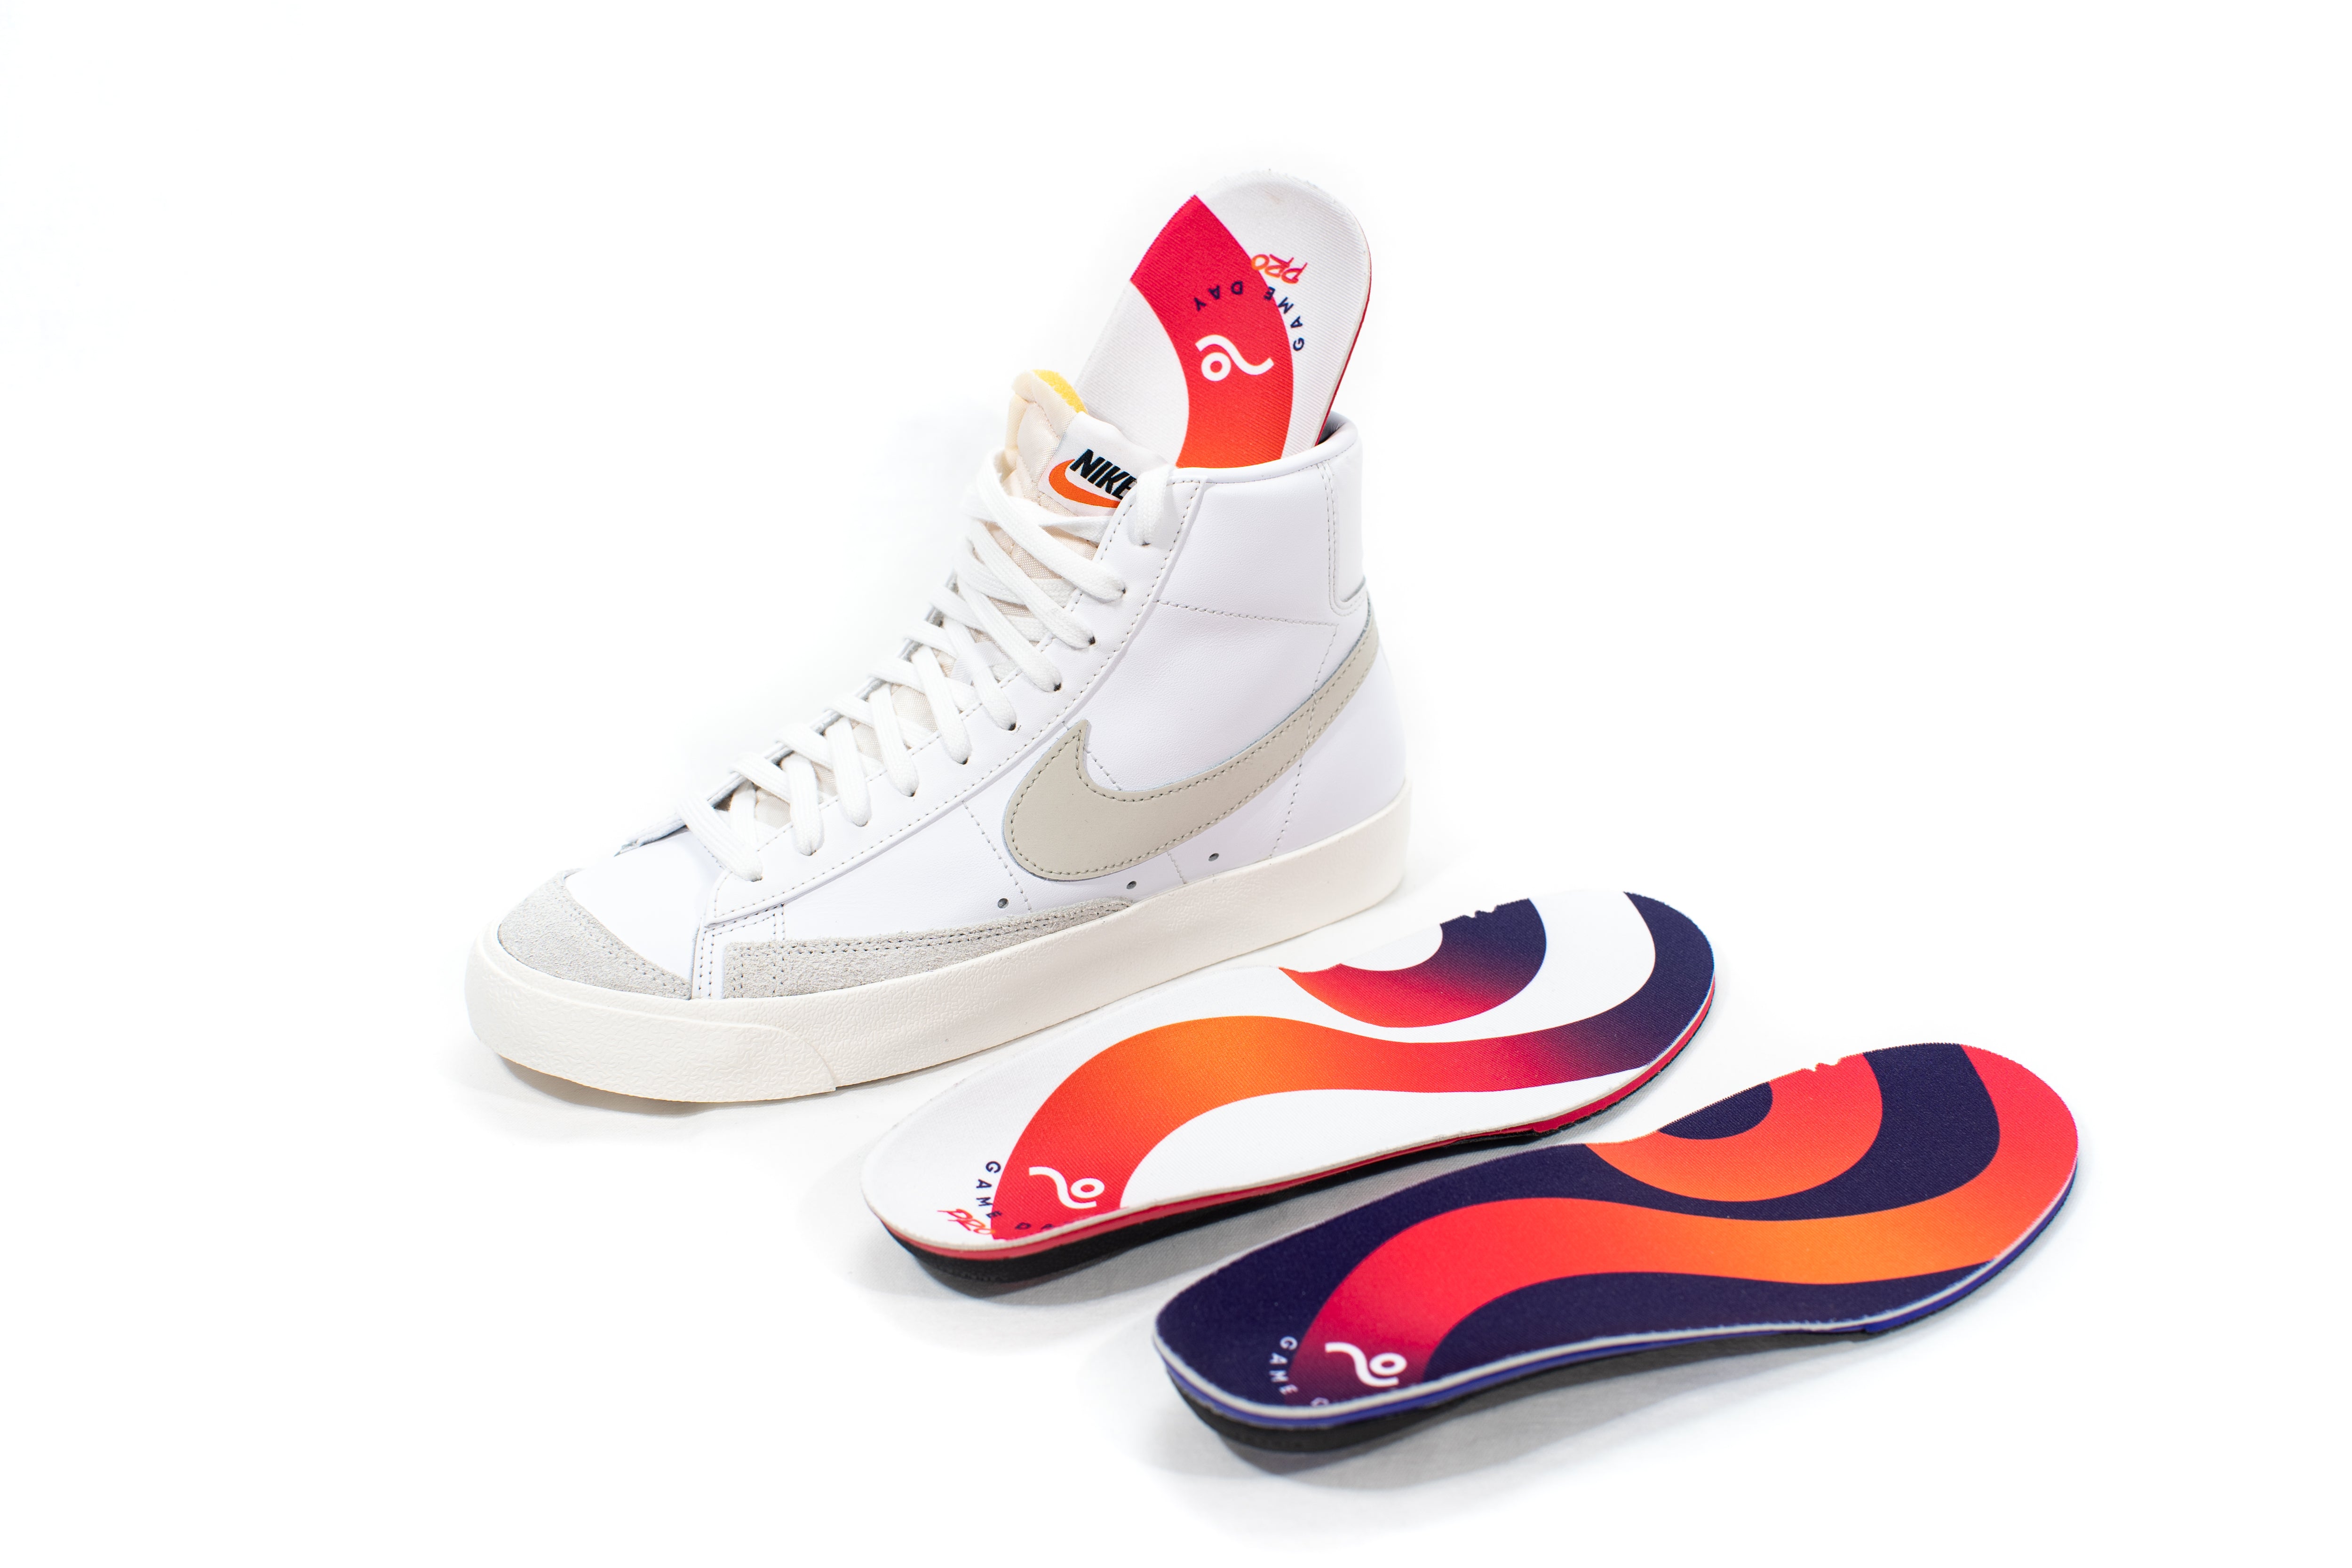 Nike Blazer Instructions and Fit Guide